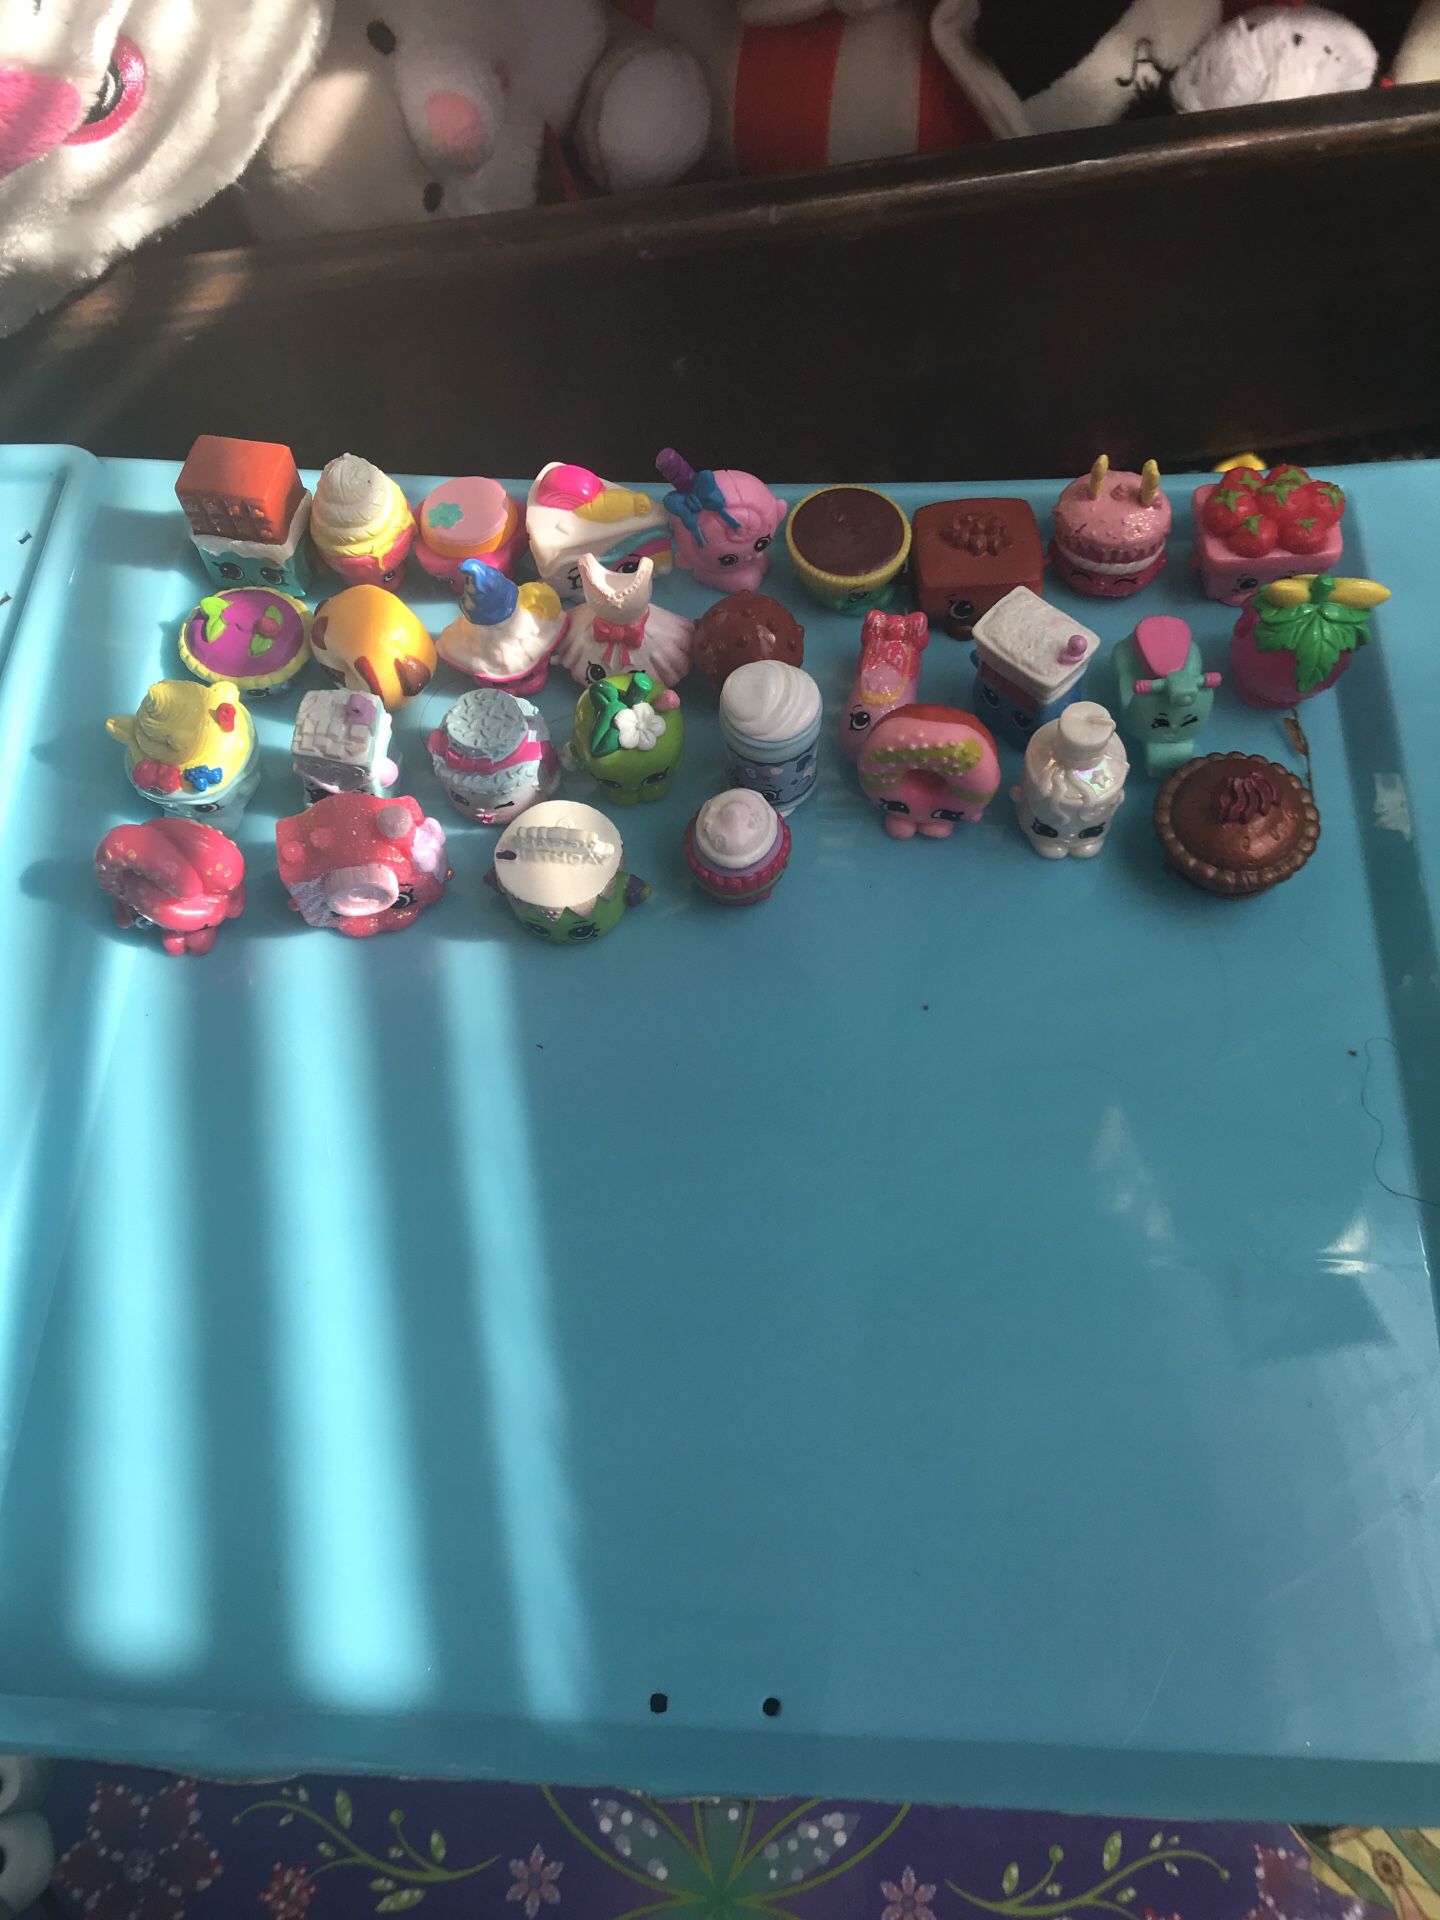 Great gift 30 shopkins for $20